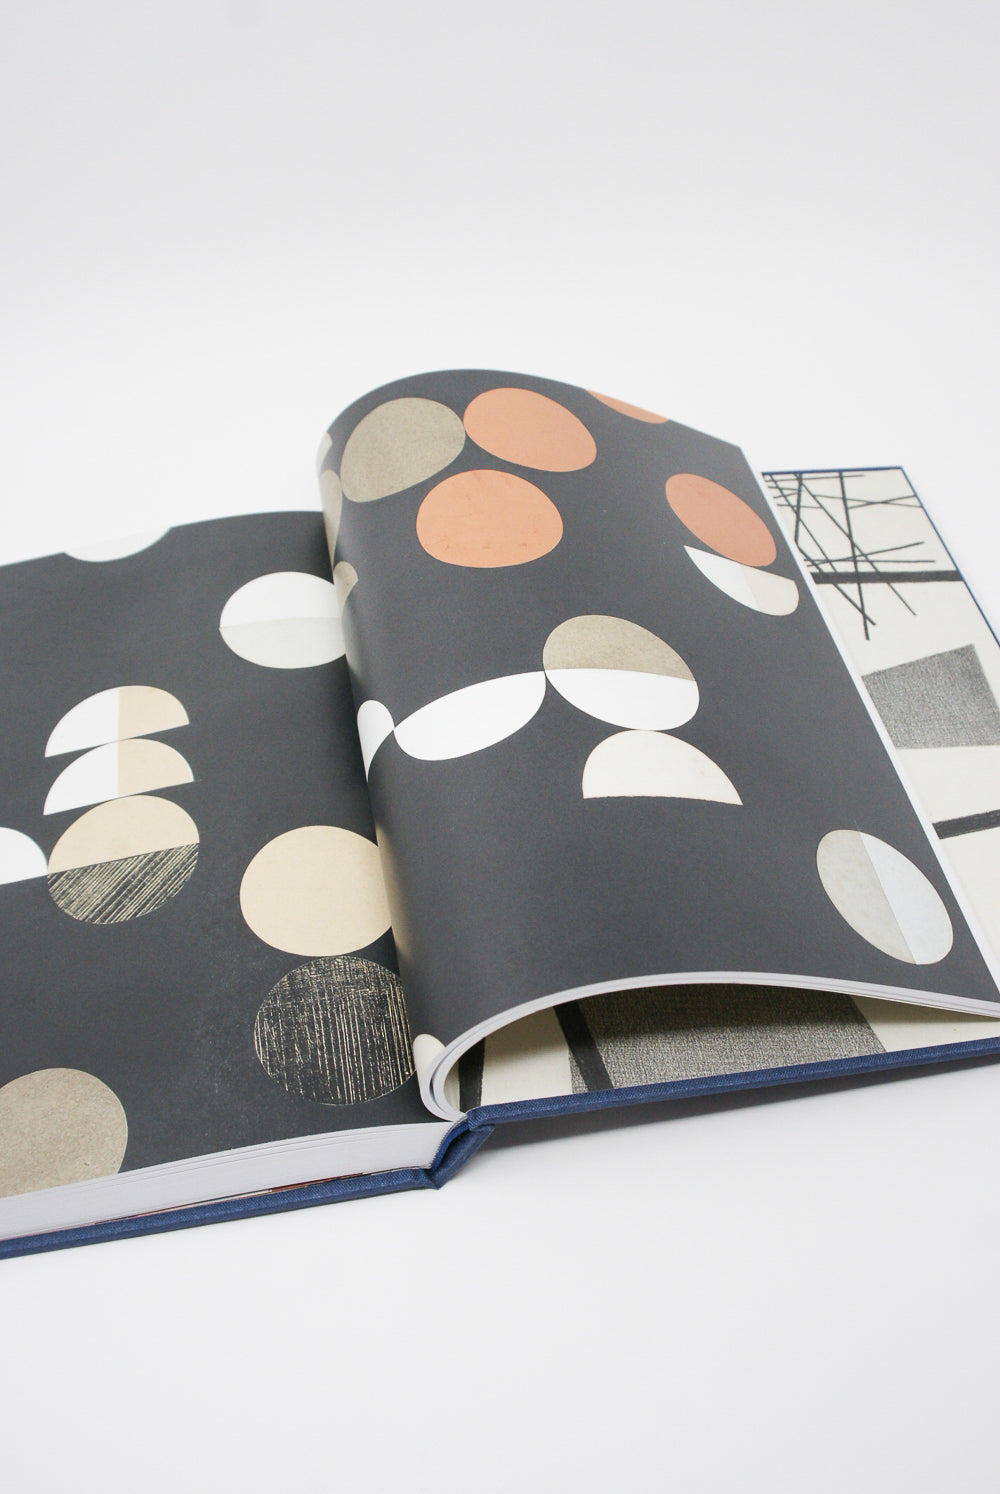 An open Sophie Taeuber-Arp: Living Abstraction book with black and white circles on it, displayed at the retrospective of abstract artist Taeuber-Arp by Artbook/D.A.P.